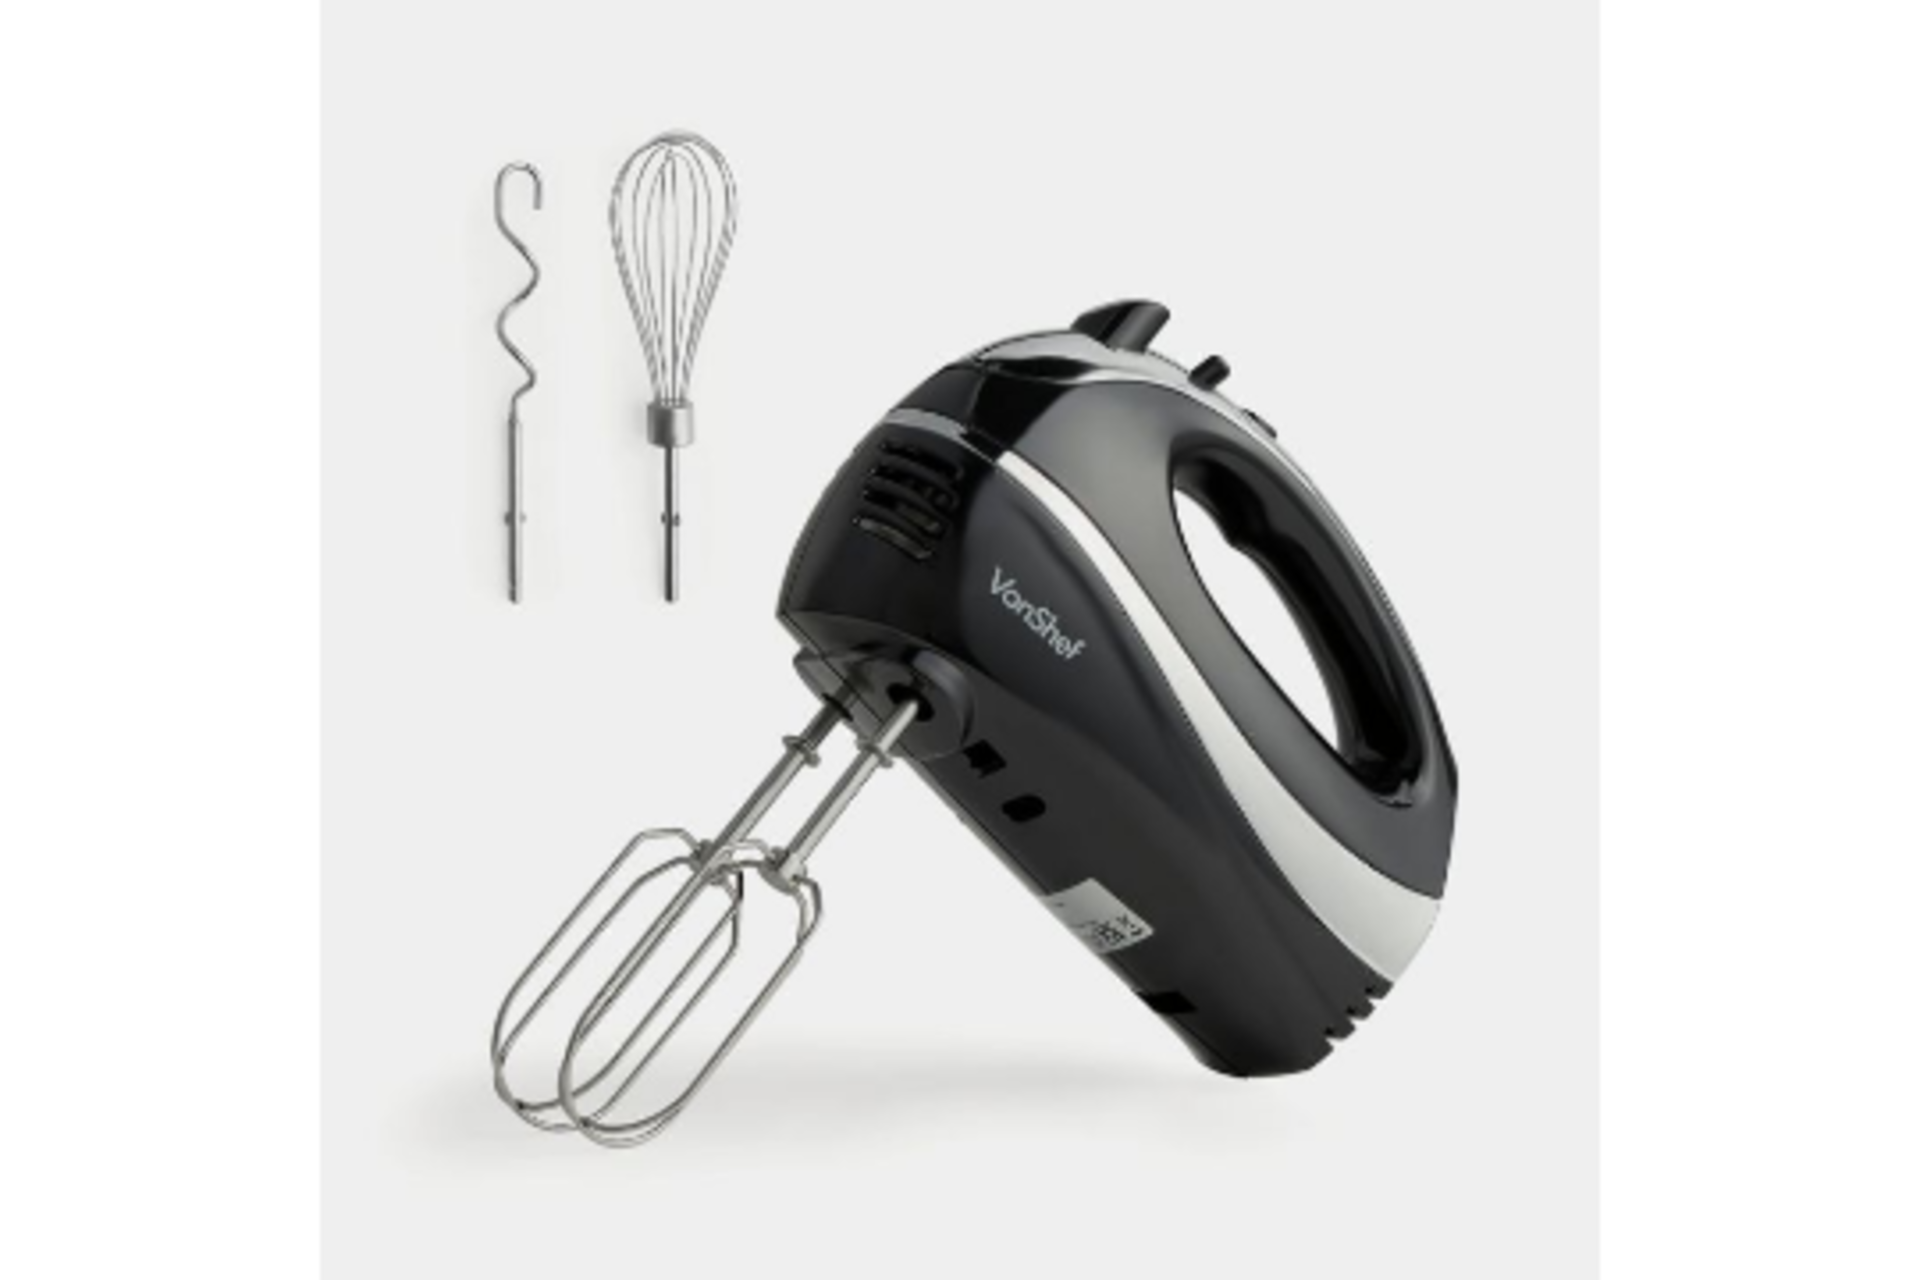 300W Hand Mixer - Black (ER51) This is the ultimate kitchen appliance if you love baking and